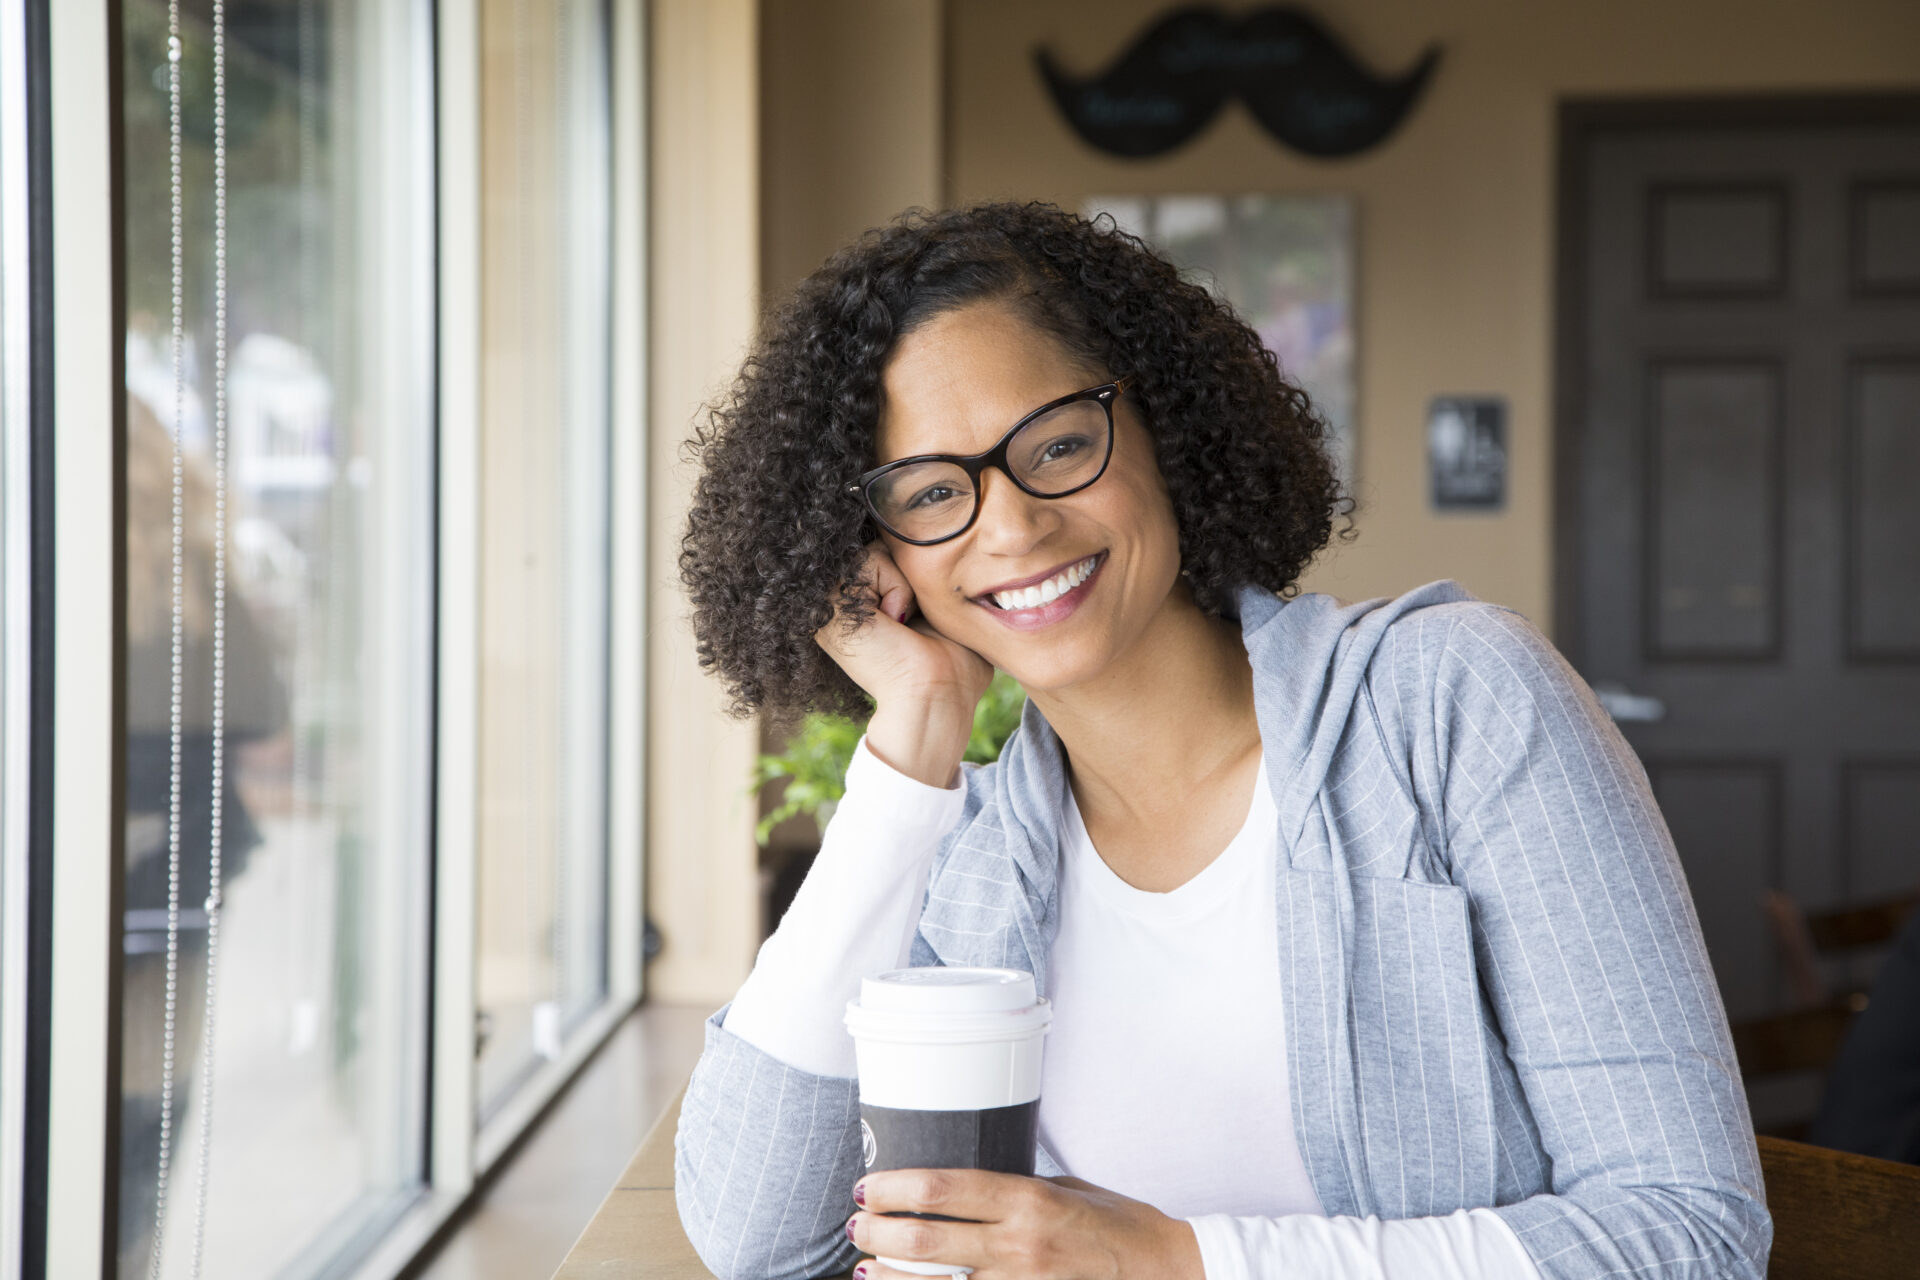 A woman wearing glasses holding a cup of coffee